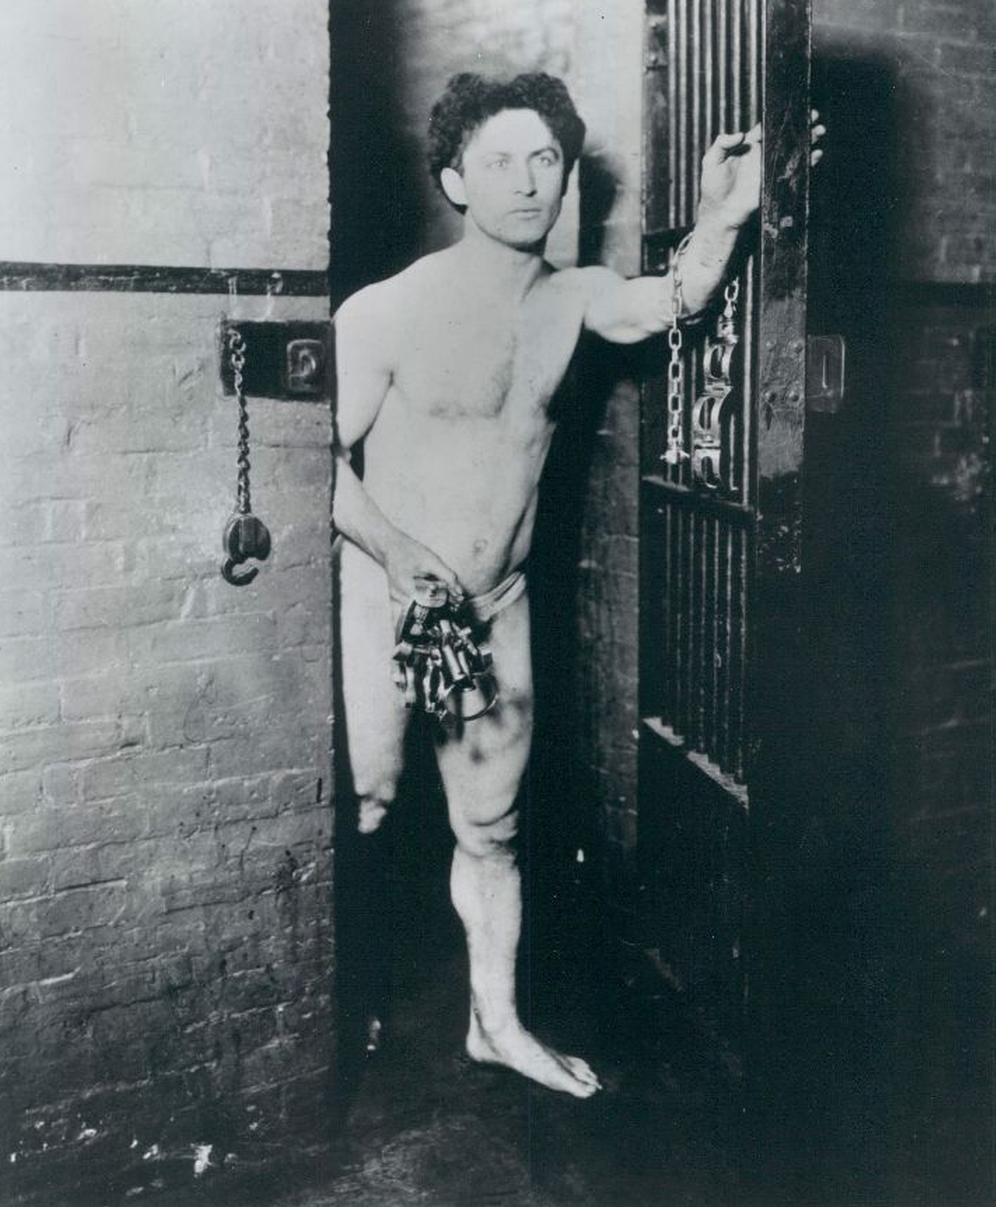 Harry Houdini and his famous trick "Escape From Murderer’s Row"